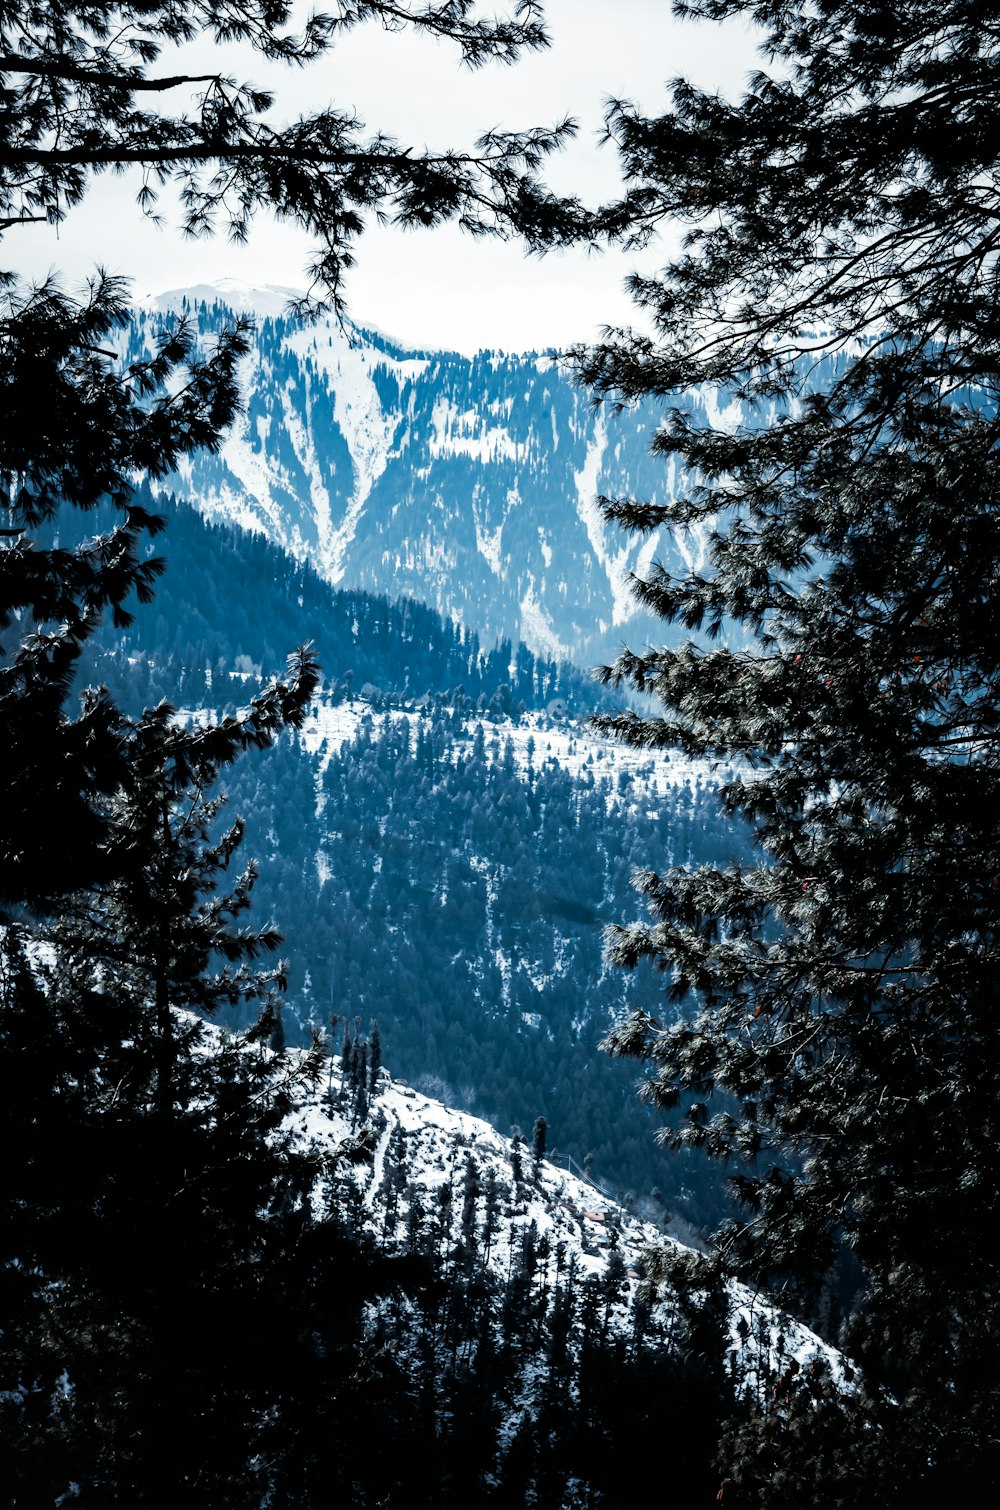 a view of a snowy mountain through some trees